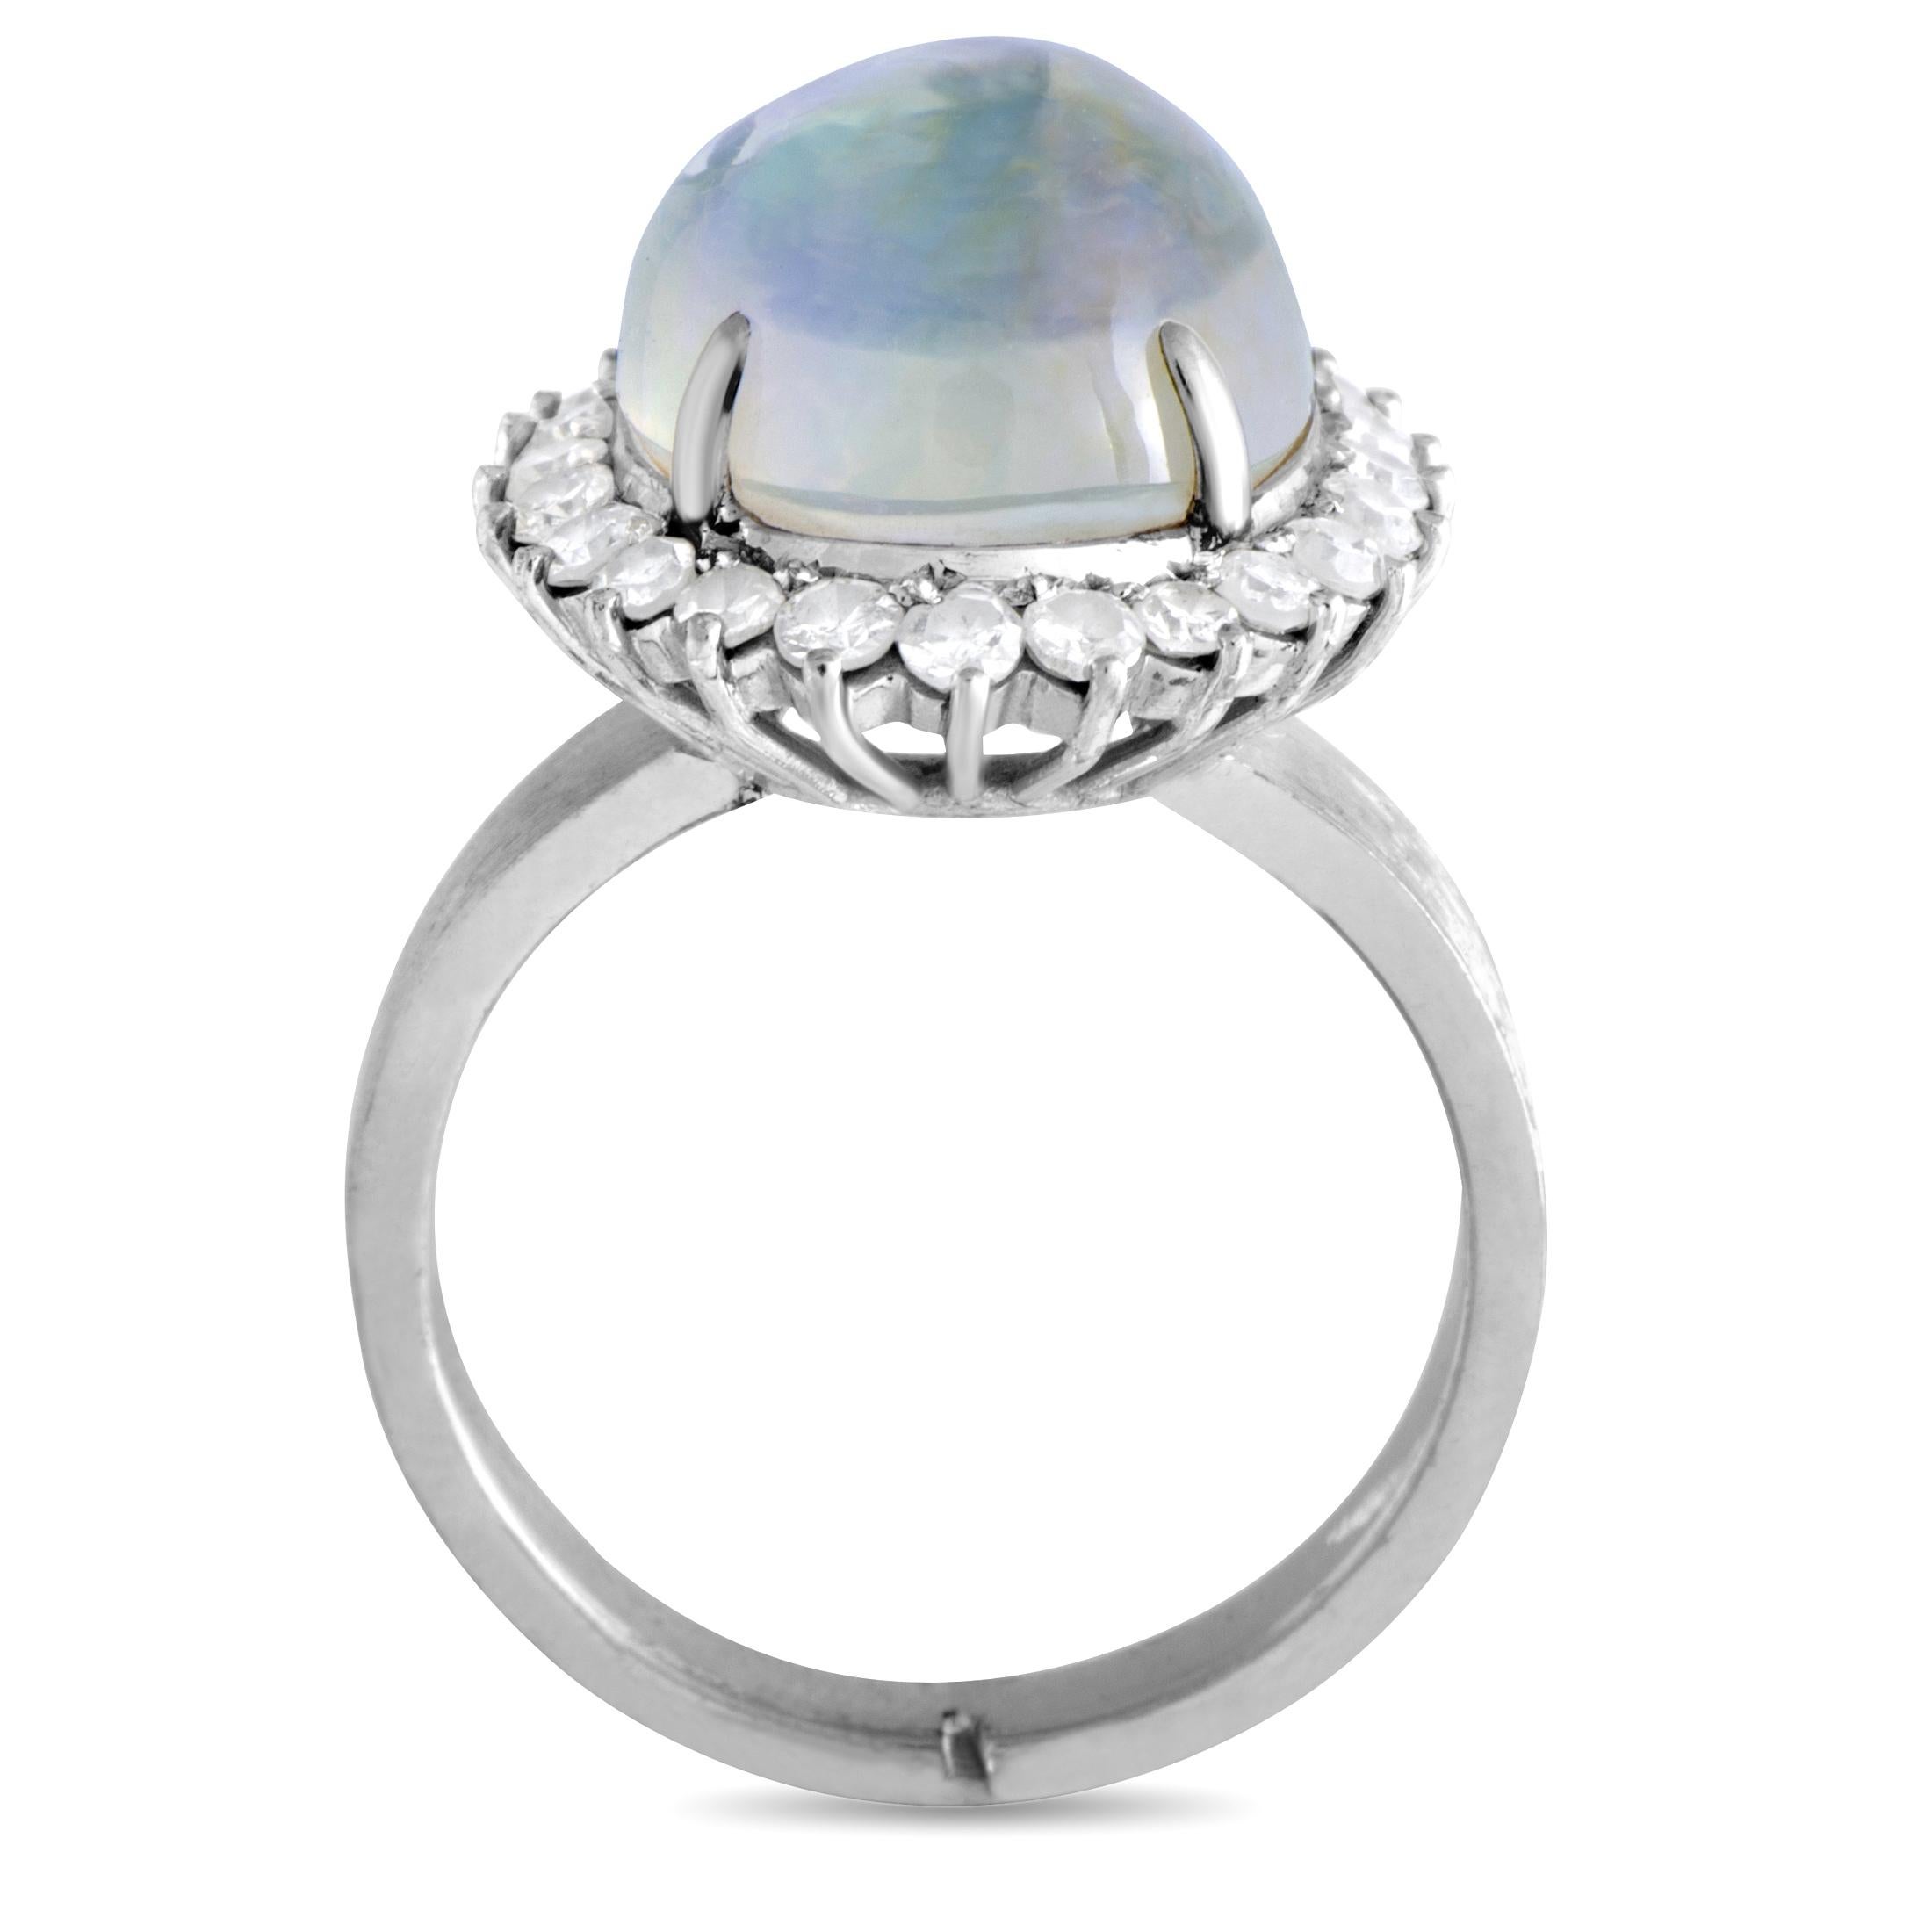 The fairytale-like beauty of the enticing opal is marvelously brought out by the scintillating brilliance of diamonds in this majestic 18K white gold ring. The diamonds amount to 0.65 carats, while the opal weighs 7.00 carats.
Ring Top Dimensions: